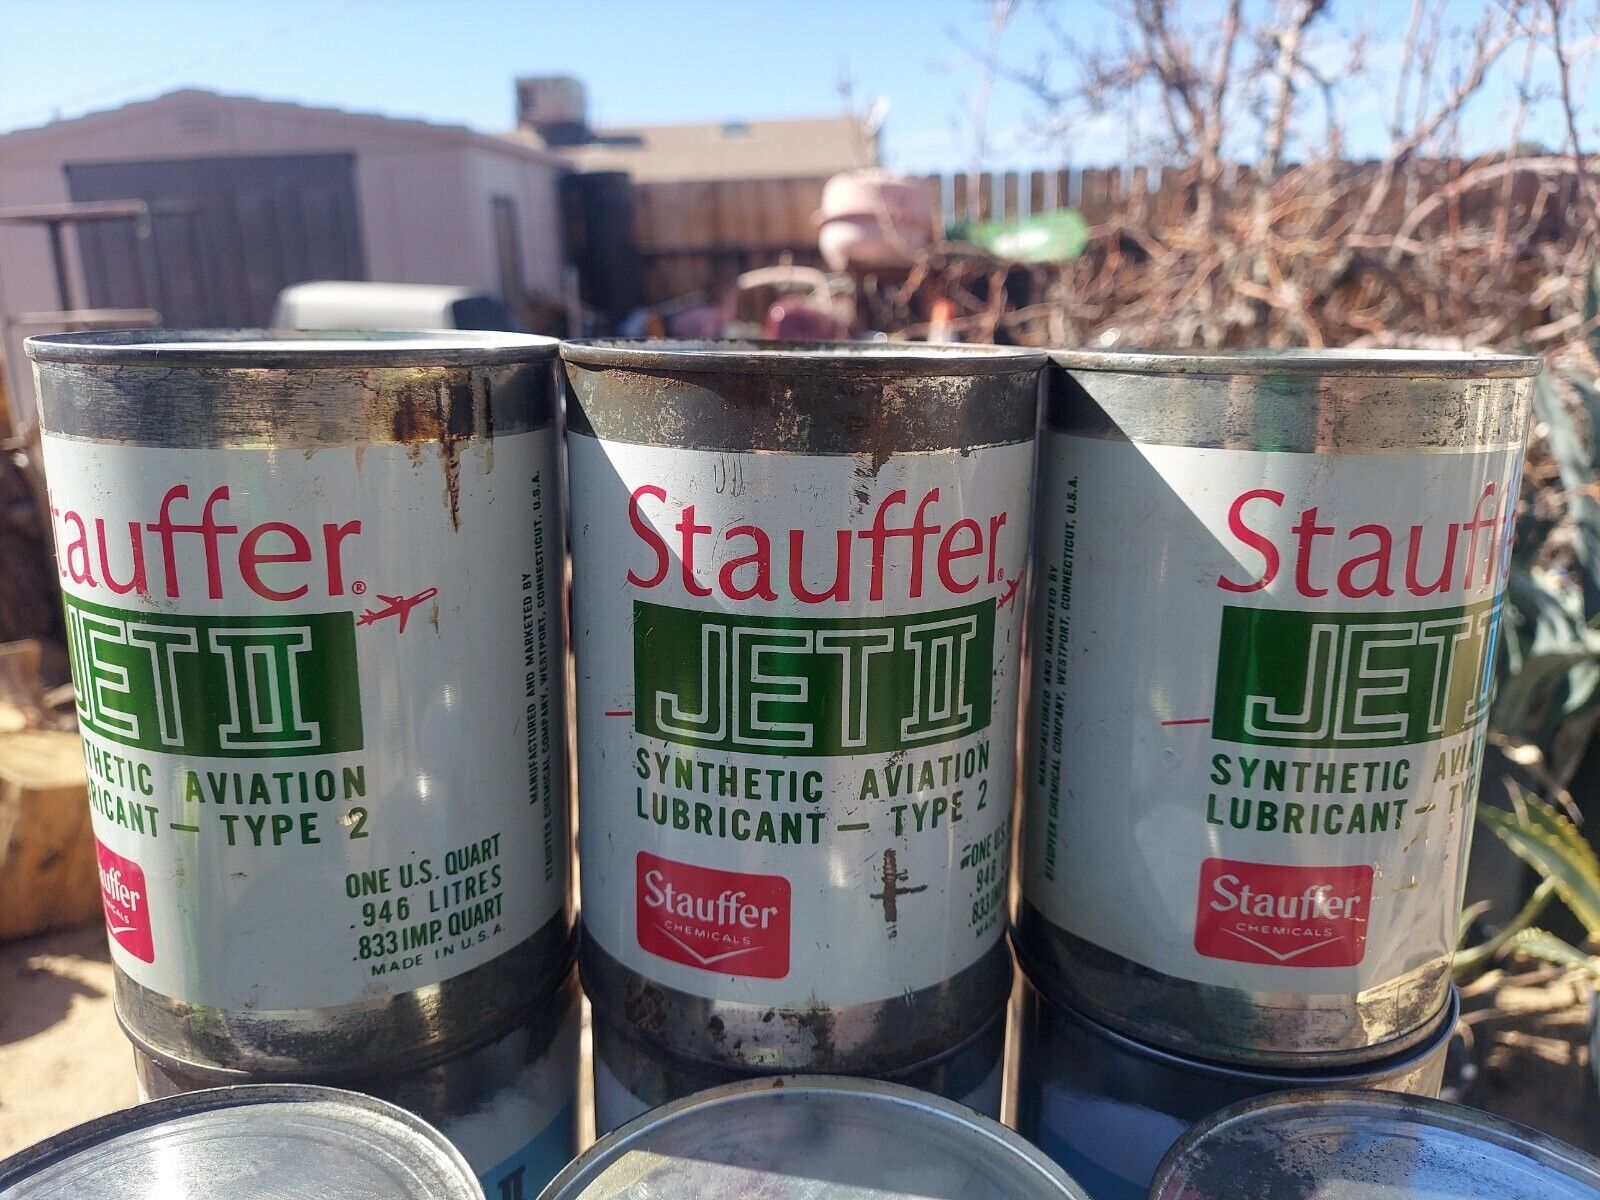 Vintage Stauffer Jet II Synthetic Aviation Lubricant-type 2 qty 3 cans